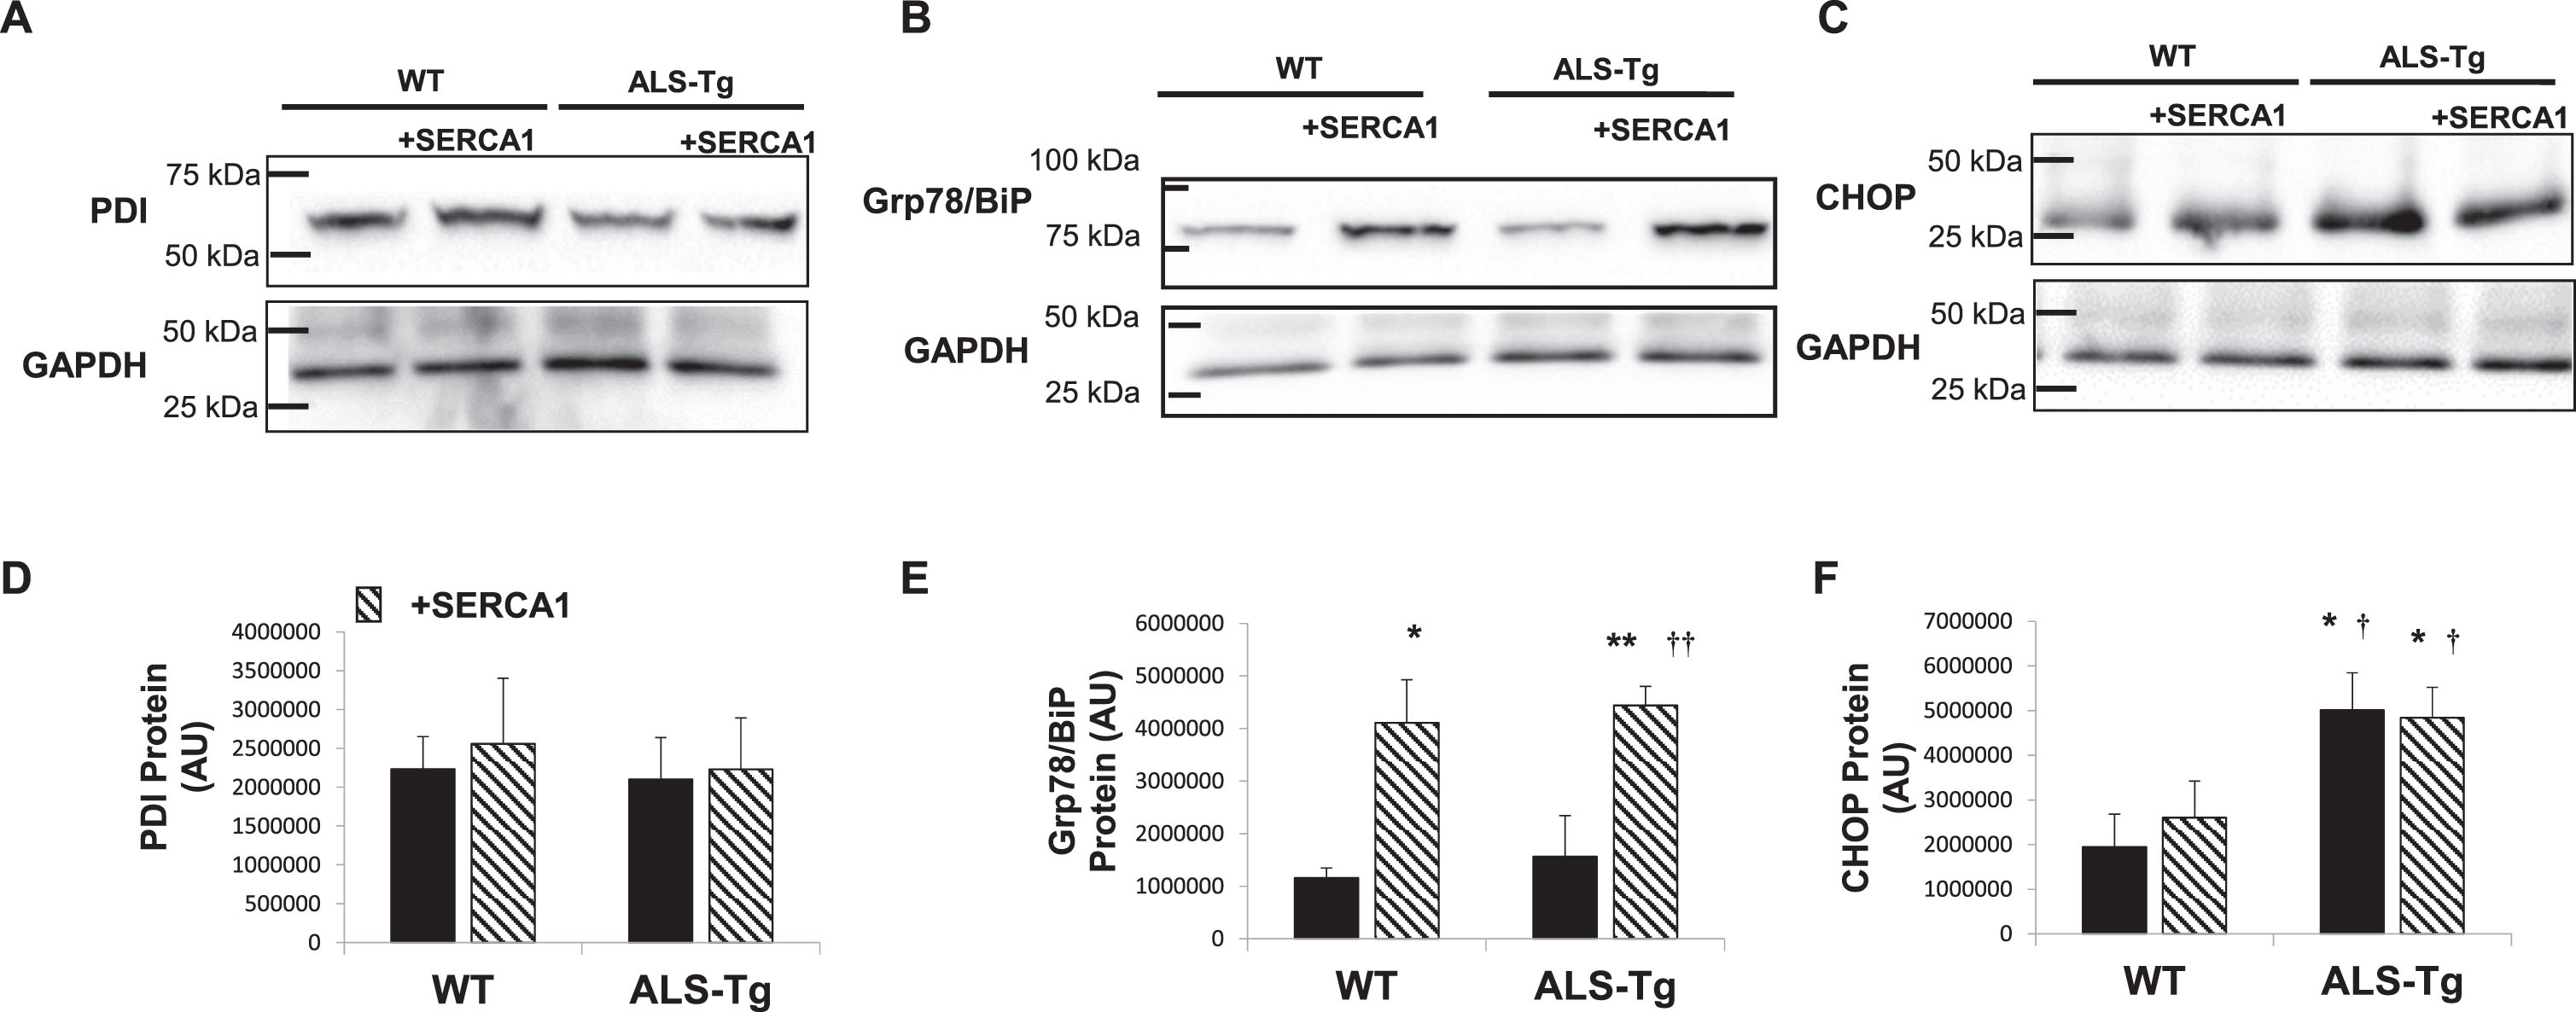 Proteins of the unfolded protein and ER stress response pathways in in skeletal muscle of WT, ALS-Tg and SERCA1 overexpressing mice. A-C) Representative western blot images for protein disulfide isomerase (PDI) (A), Grp78/BiP (B) and ER stress-specific cell death signaling protein C/EBP homologous protein (CHOP) (C) in QUAD muscle from WT and ALS-Tg mice with and without SERCA1 overexpression. D–F) Quantitative analysis of western blot images by densitometry for PDI (D), Grp78/BiP (E) and CHOP (F). Data shown are in arbitrary units (AU) for WT (n = 4; 1 male and 3 female), WT/+SERCA1 (n = 4; 1 male and 3 female), ALS-Tg (n = 4; 1 male and 3 female) and ALS-Tg/+SERCA1 (n = 4; 1 male and 3 female). Average data (D–F) represent mean±SEM. *p < 0.05 vs. WT, **p < 0.01 vs. WT; †p < 0.05 or ††p < 0.01 vs. ALS-Tg.